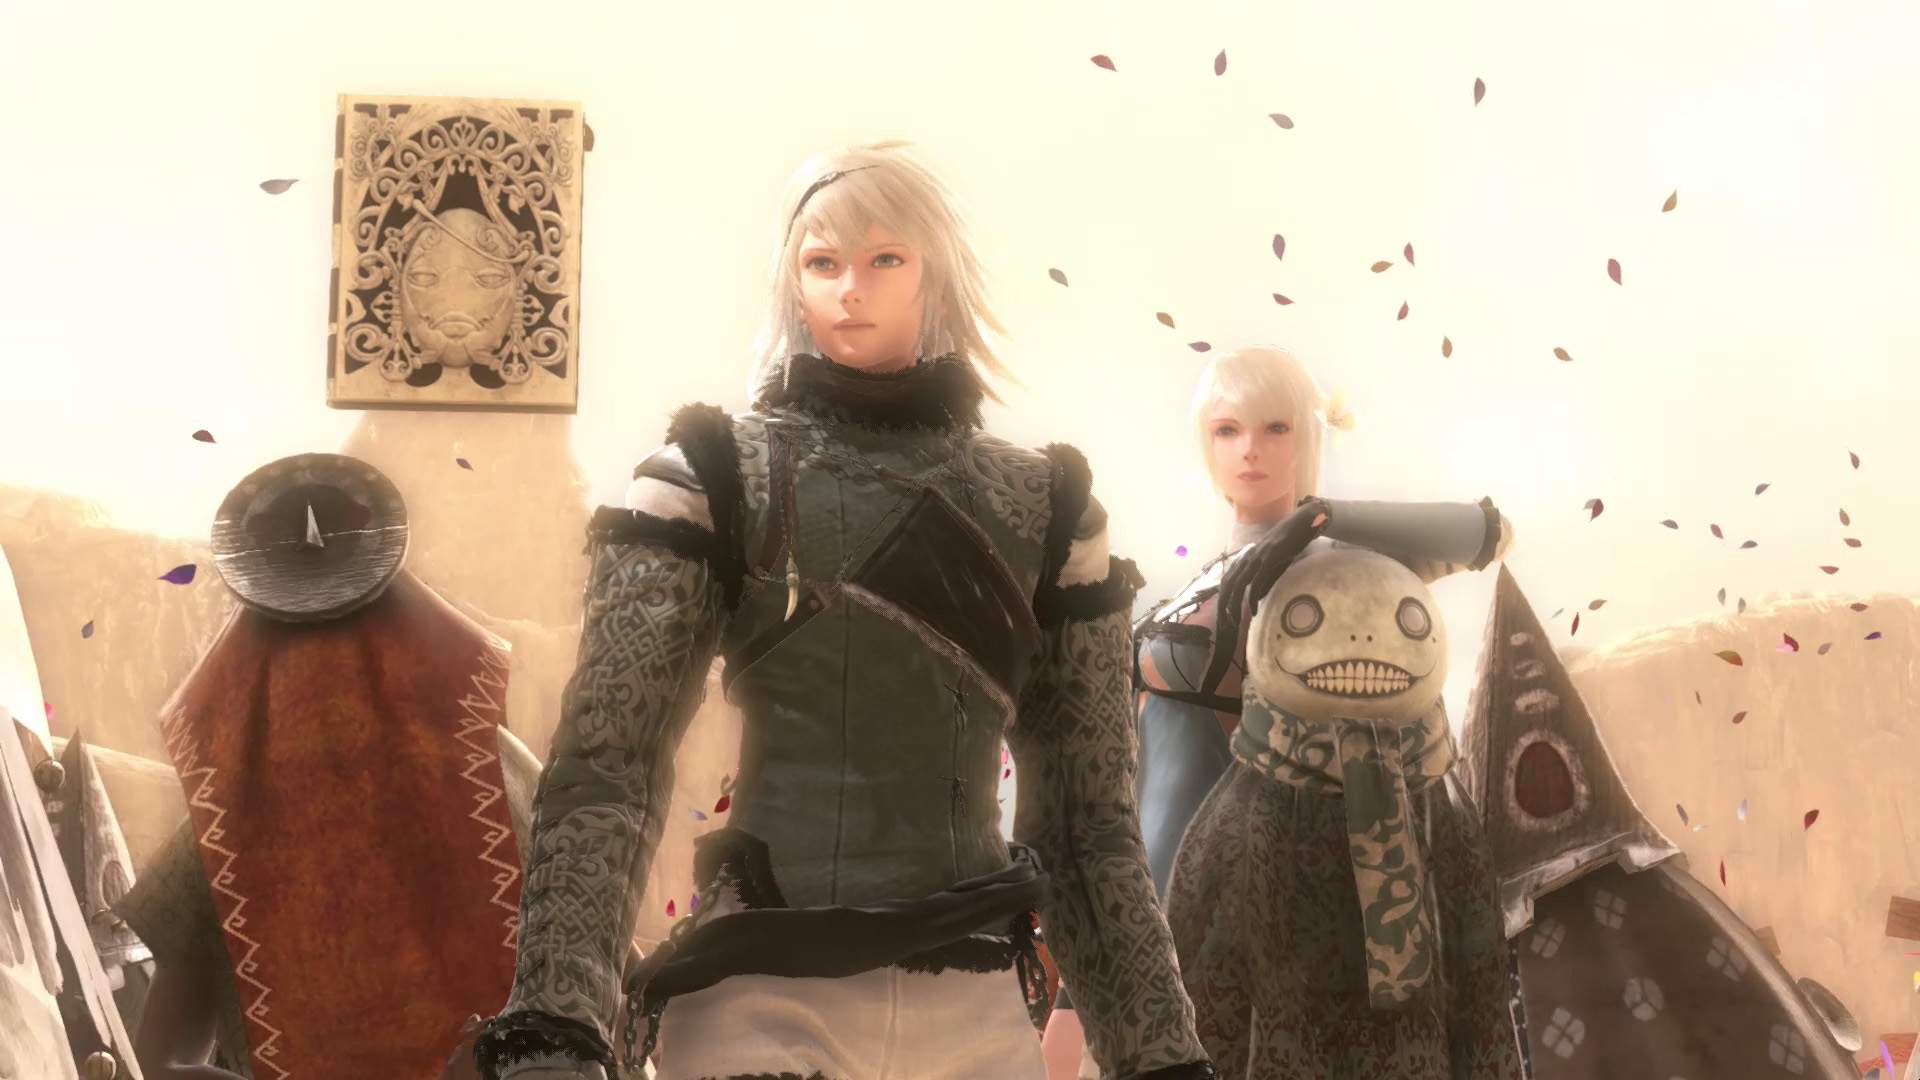 The protagonist, Grimoire Weiss, Kainé, and Emil at the Facade Wedding Ceremony.